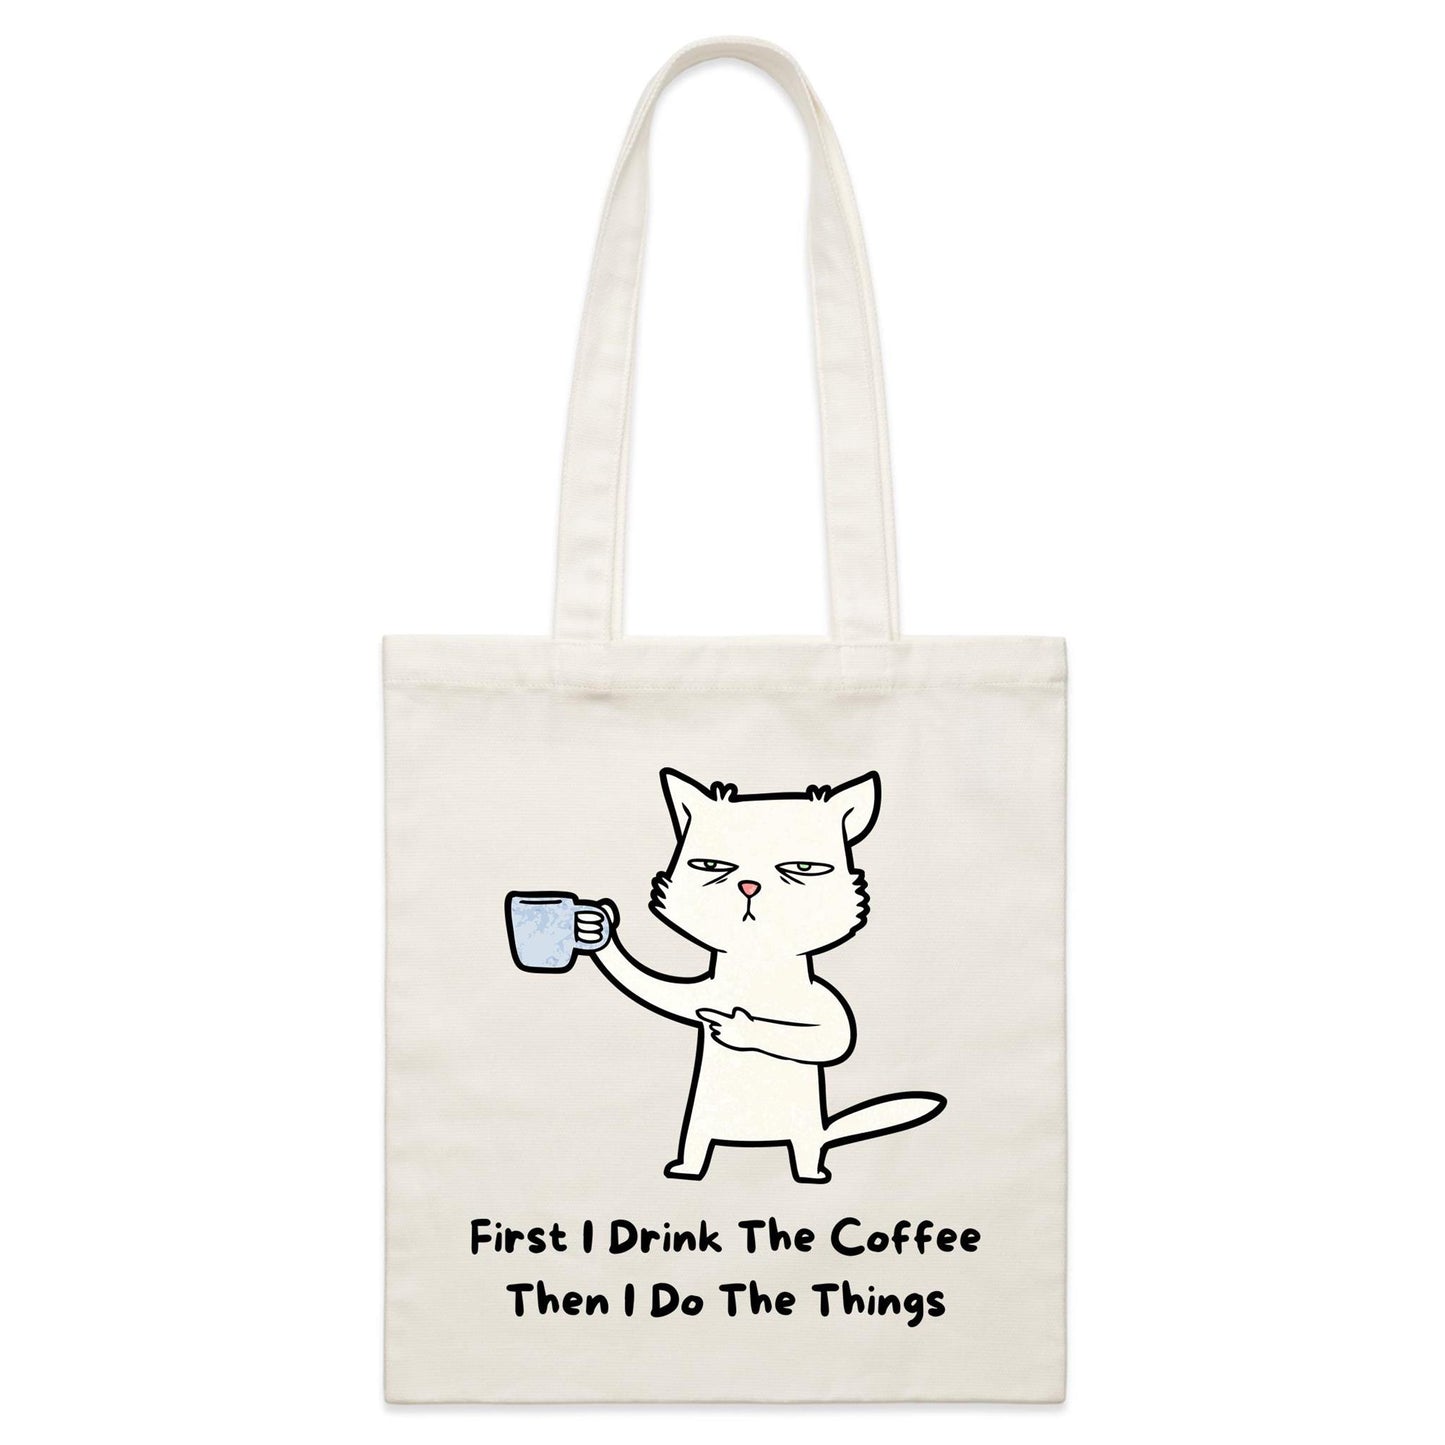 First I Drink The Coffee - Parcel Canvas Tote Bag Default Title Parcel Tote Bag animal Coffee